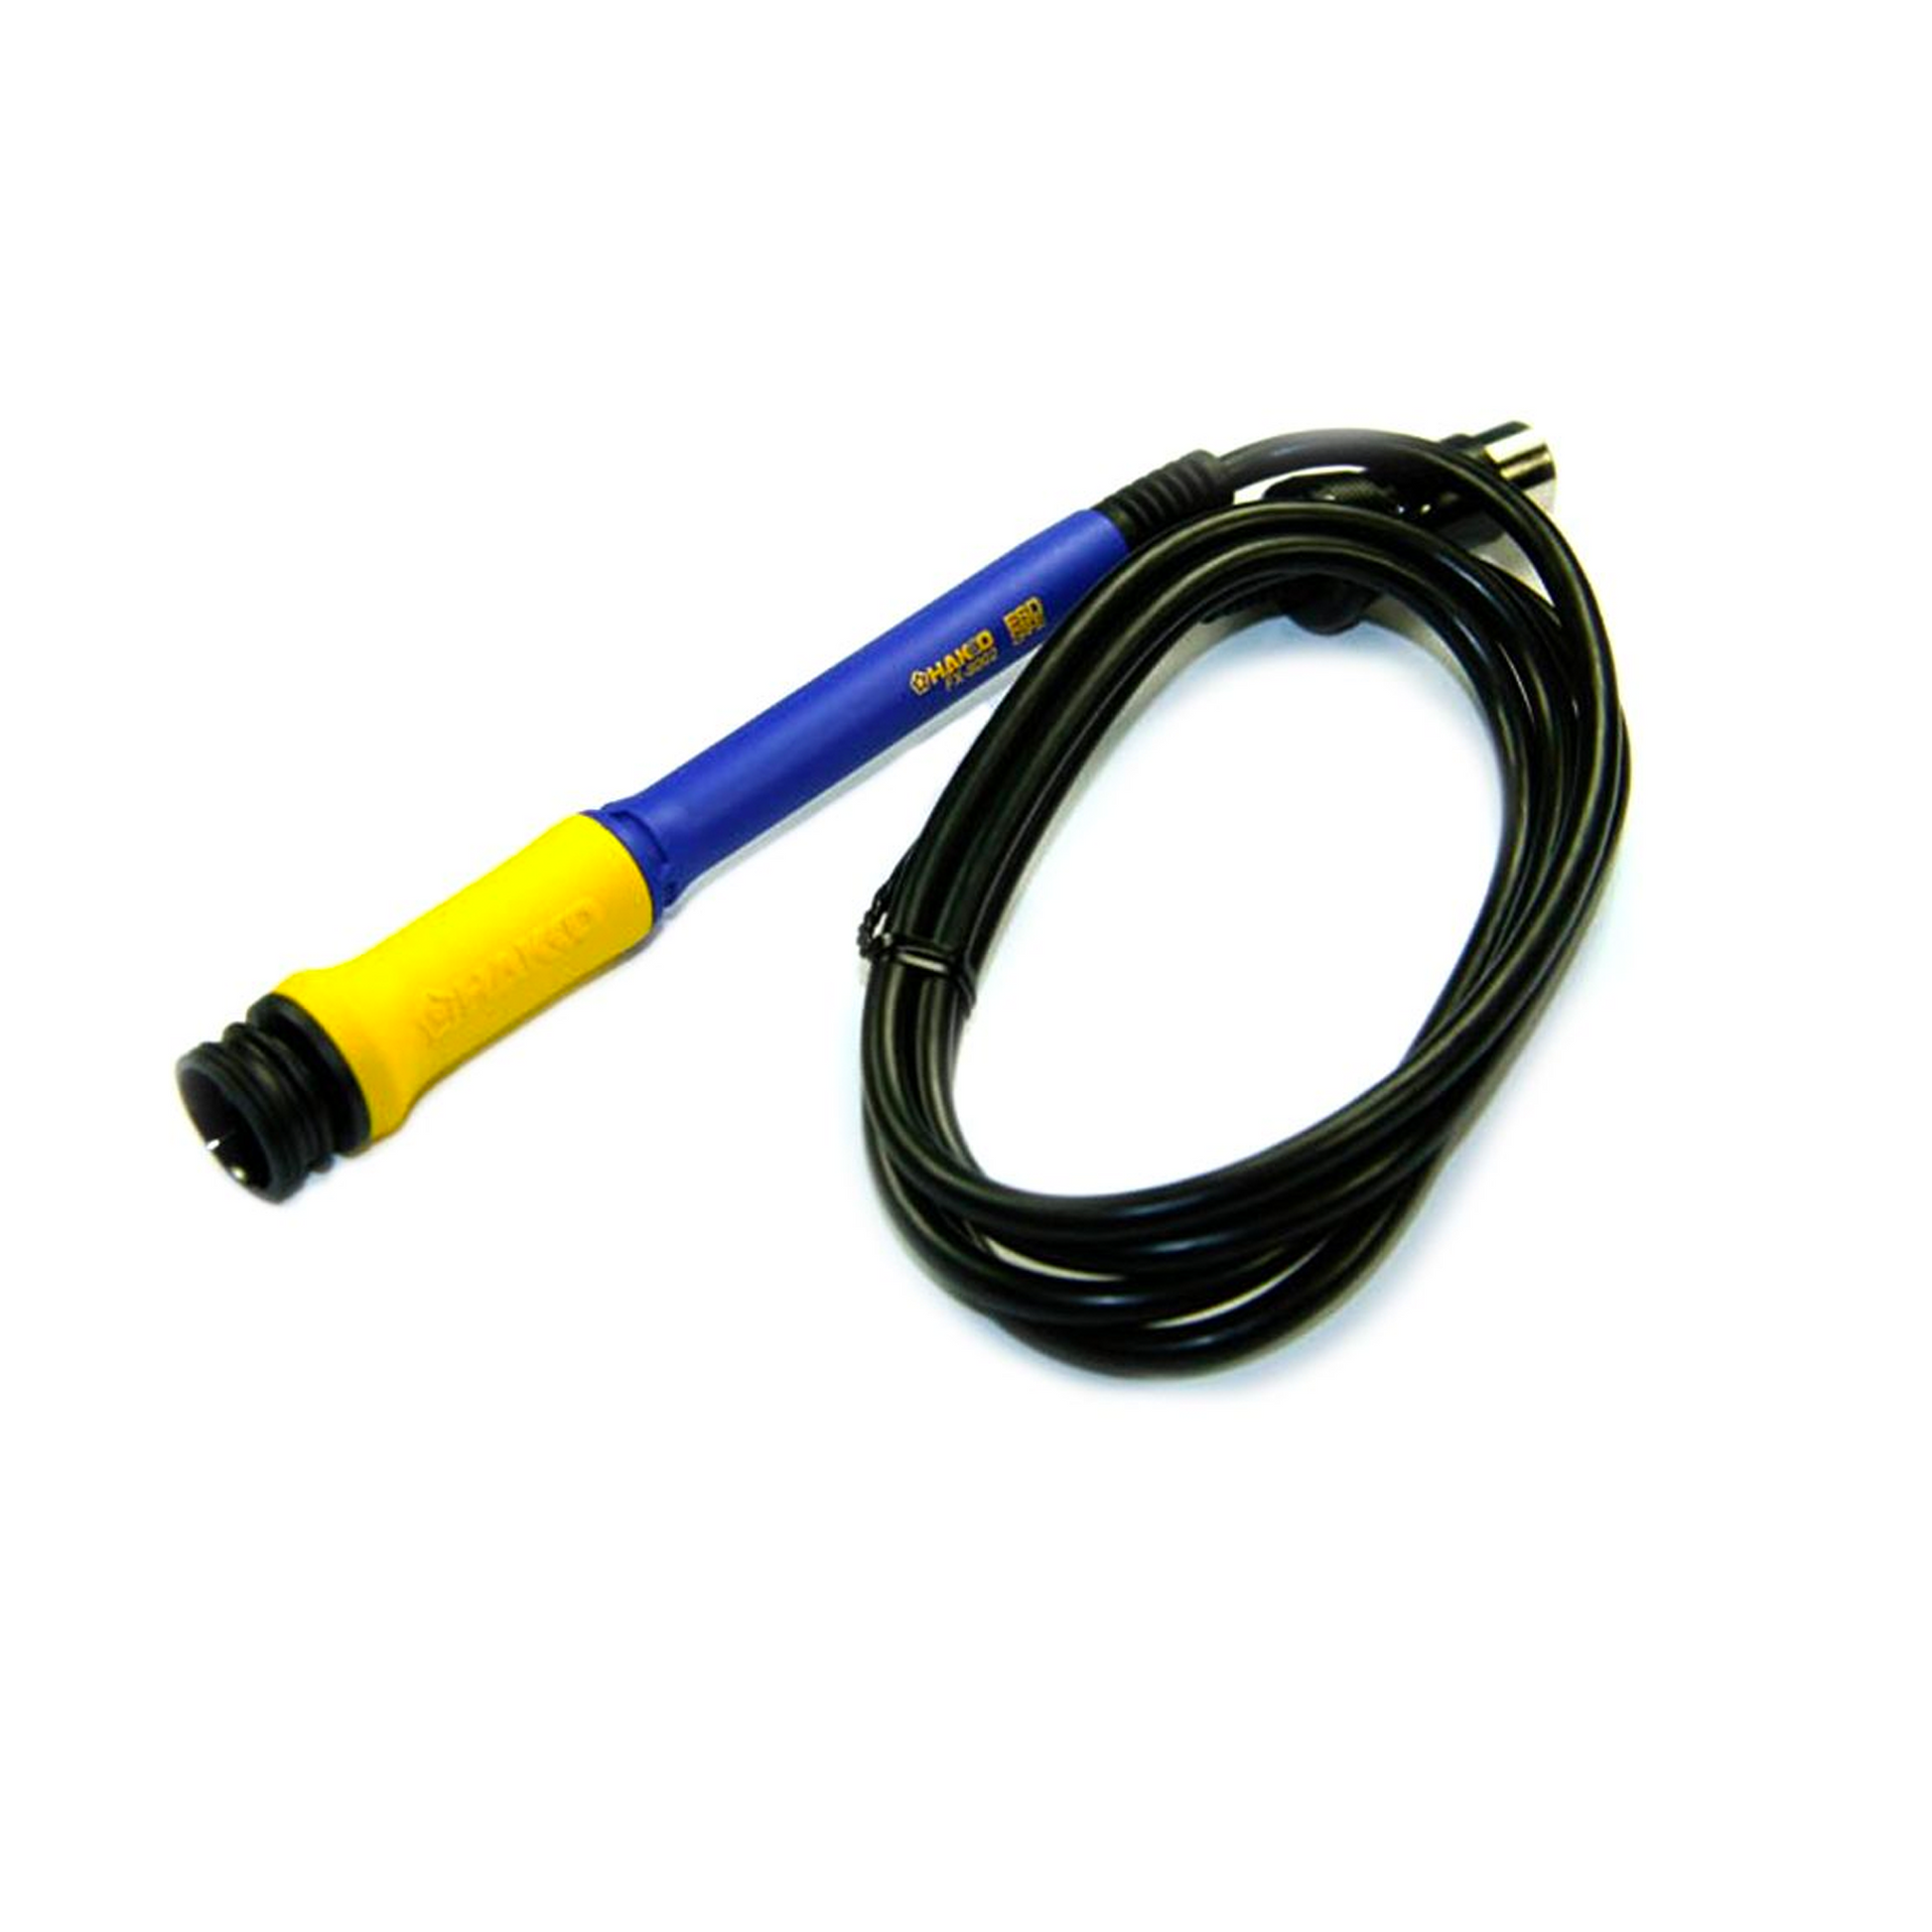 Hakko Products_ FX-8002 Soldering Iron_ Soldering station FX801 handpiece for pcb SMT SMD processing Hakko Products